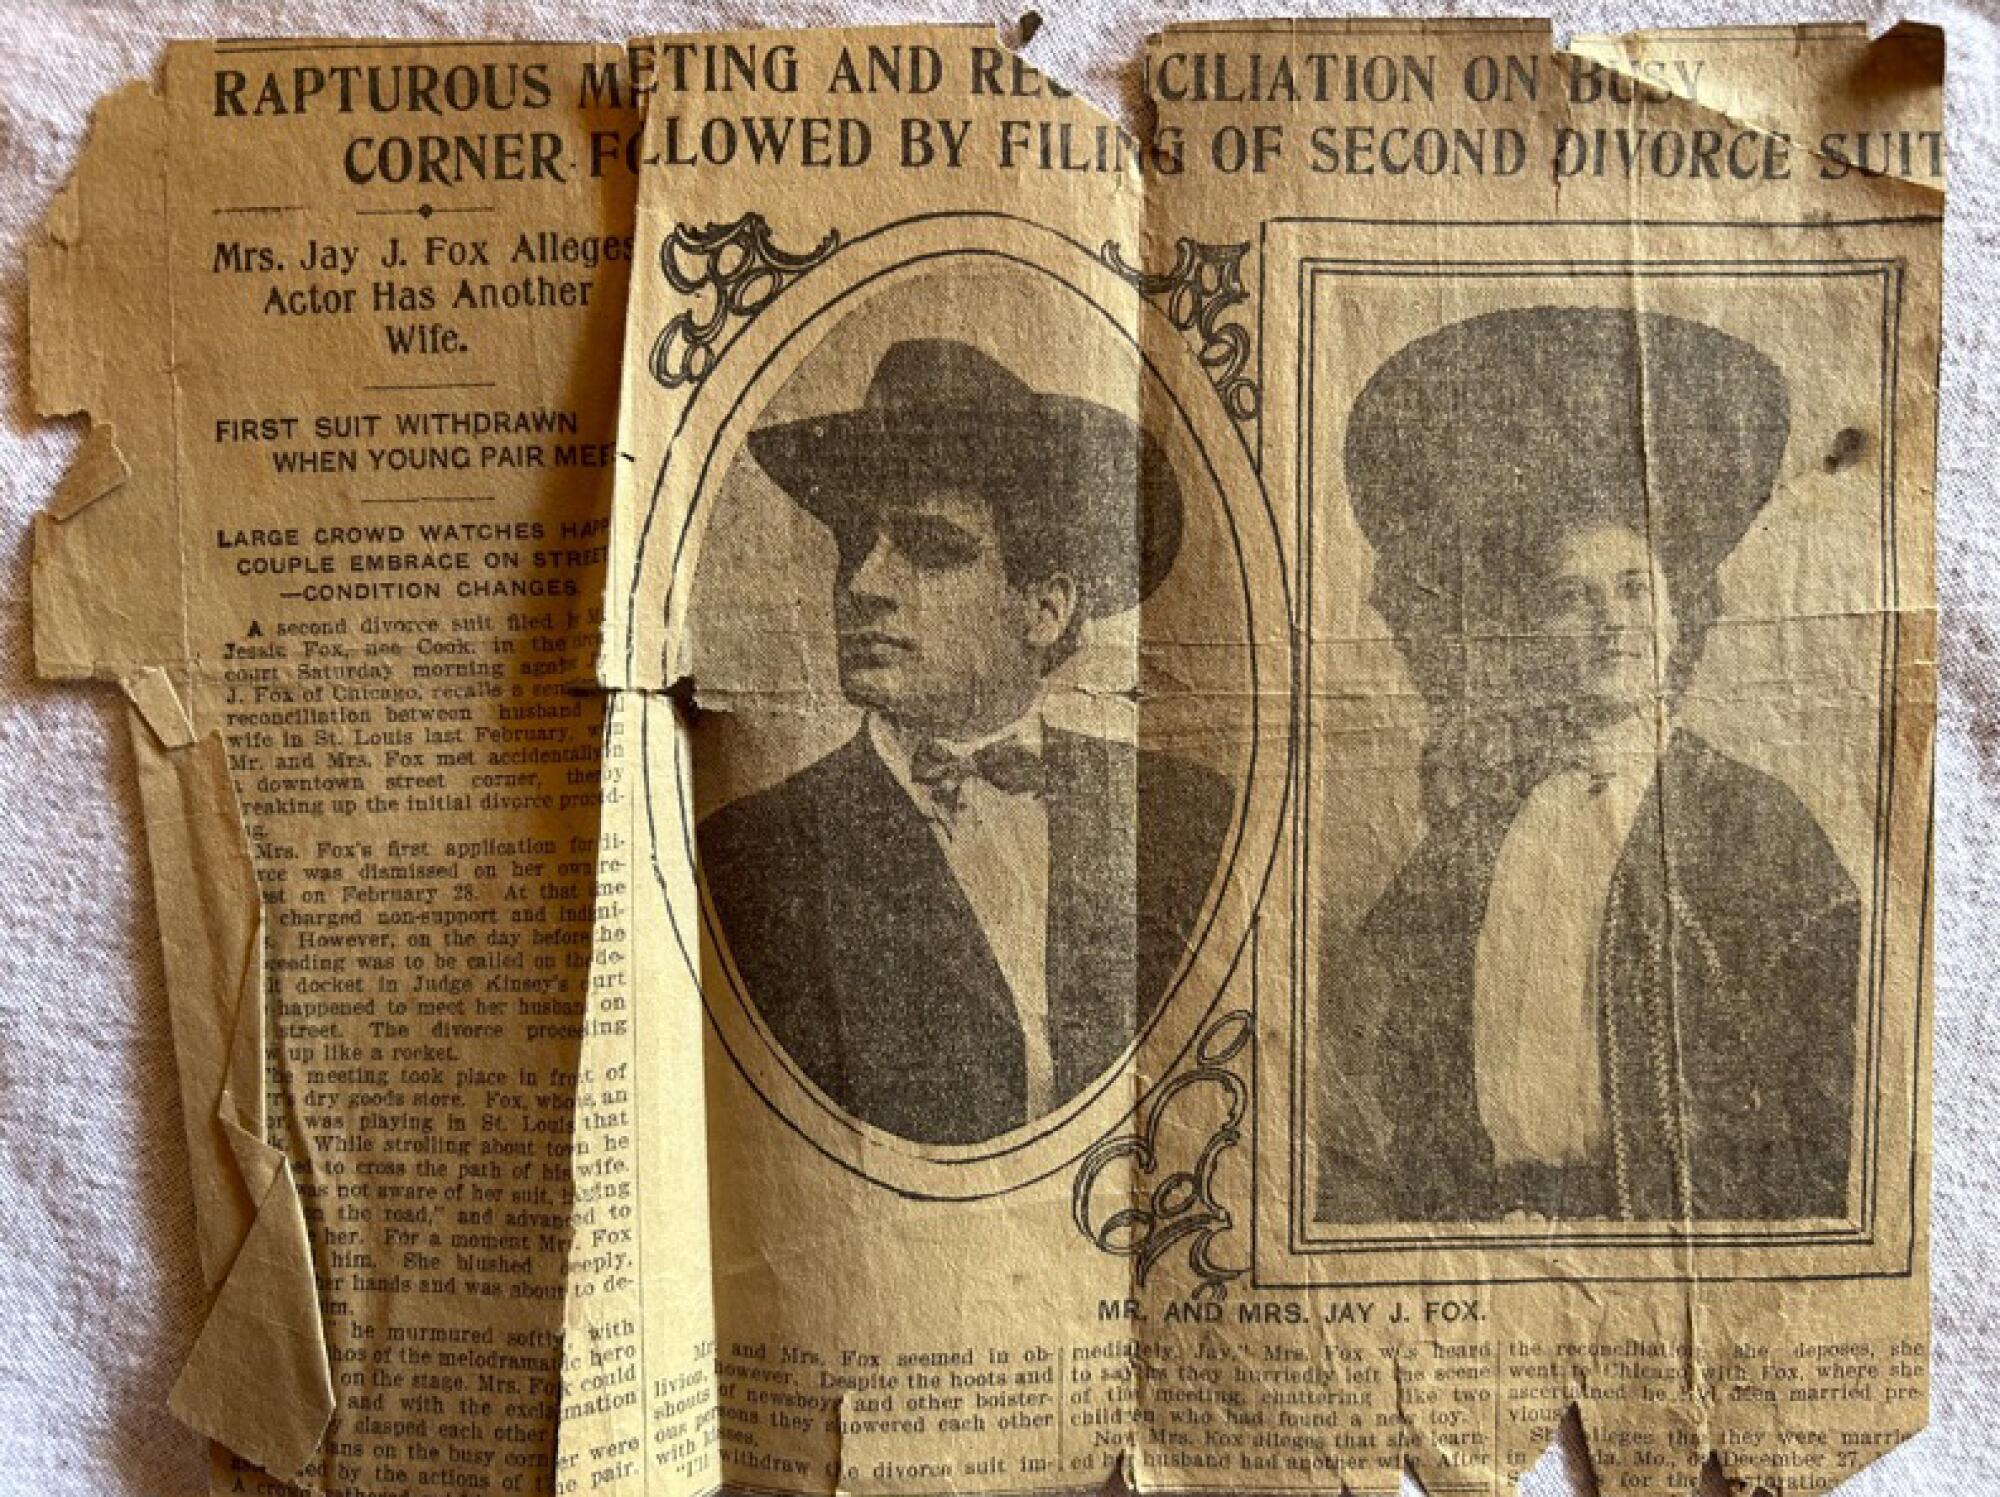 An old, folded newspaper clipping with portraits of a man and a woman